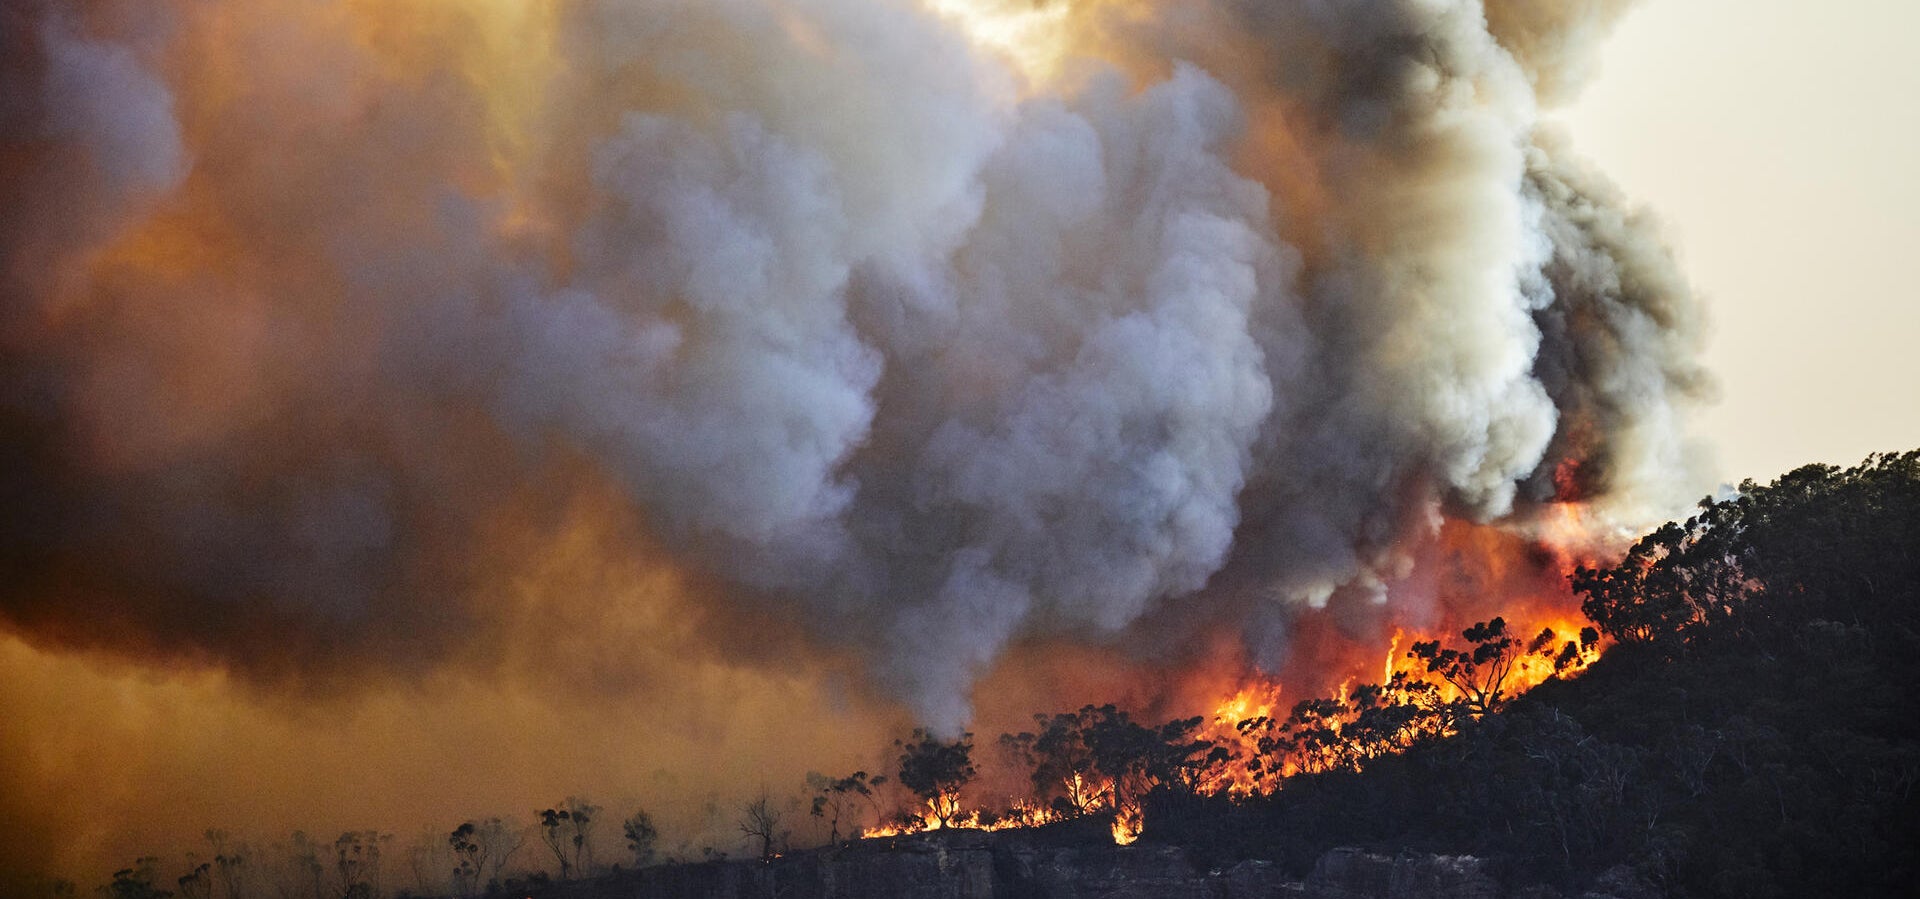 A forest fire burning and producing smoke.